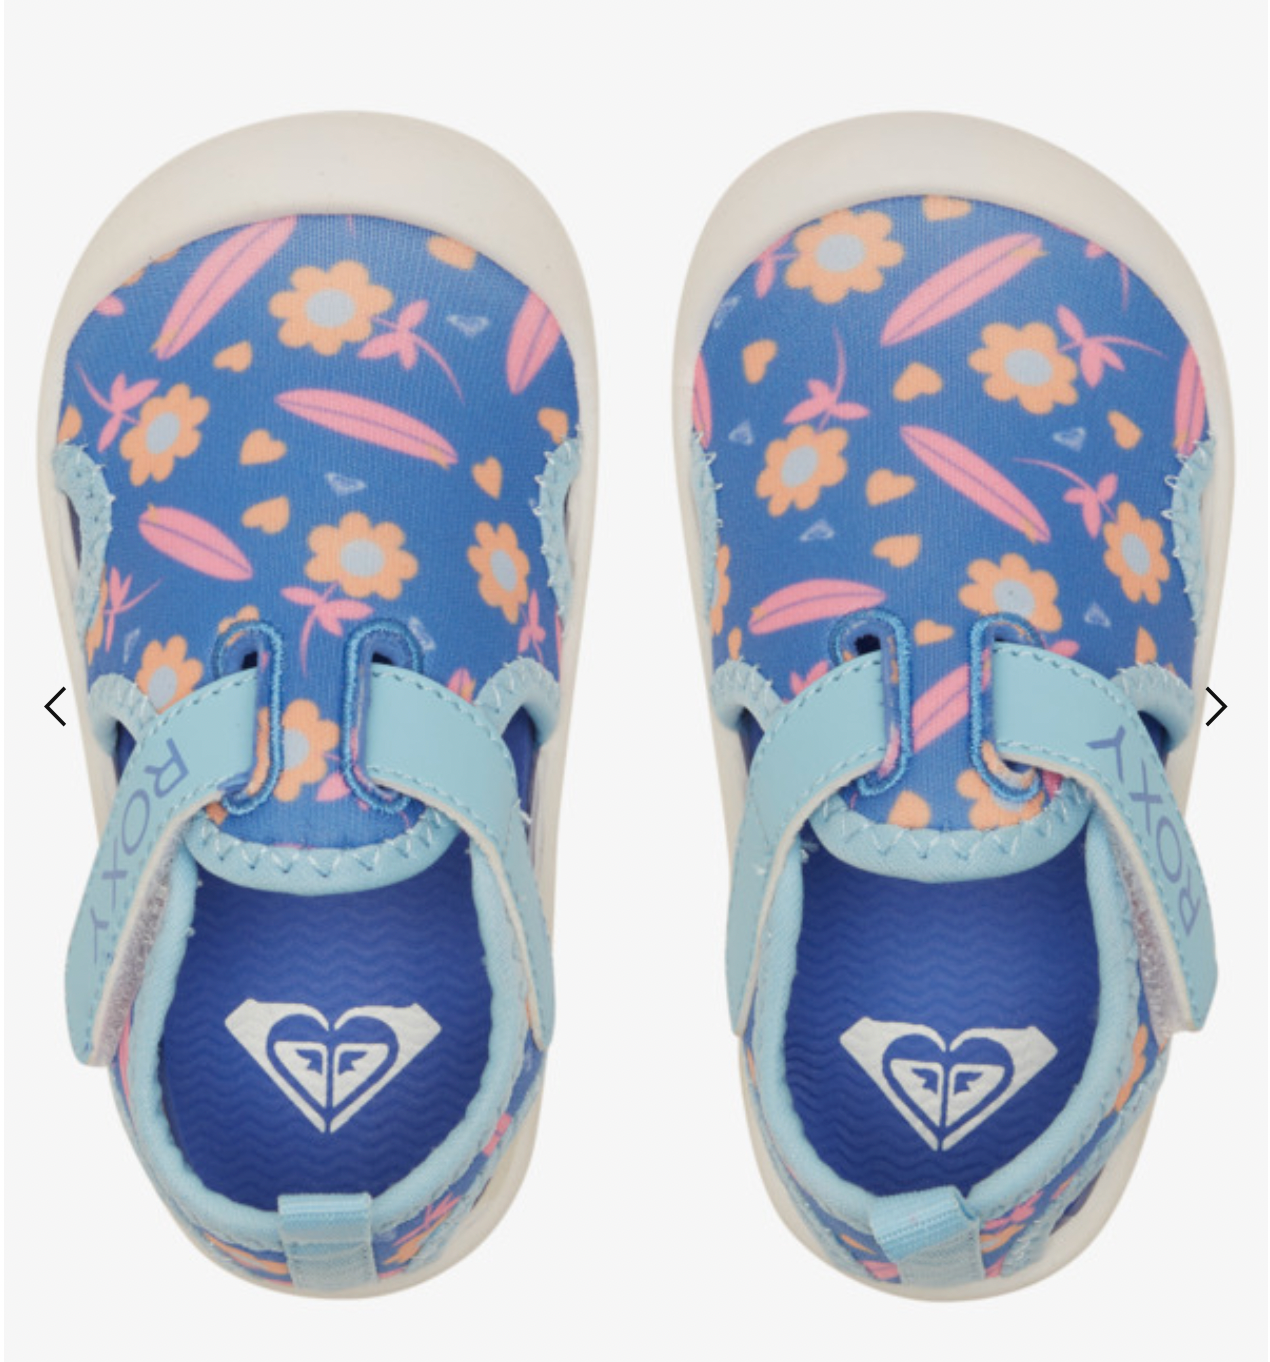 ROXY Grom - Slip-On Shoes for Toddlers